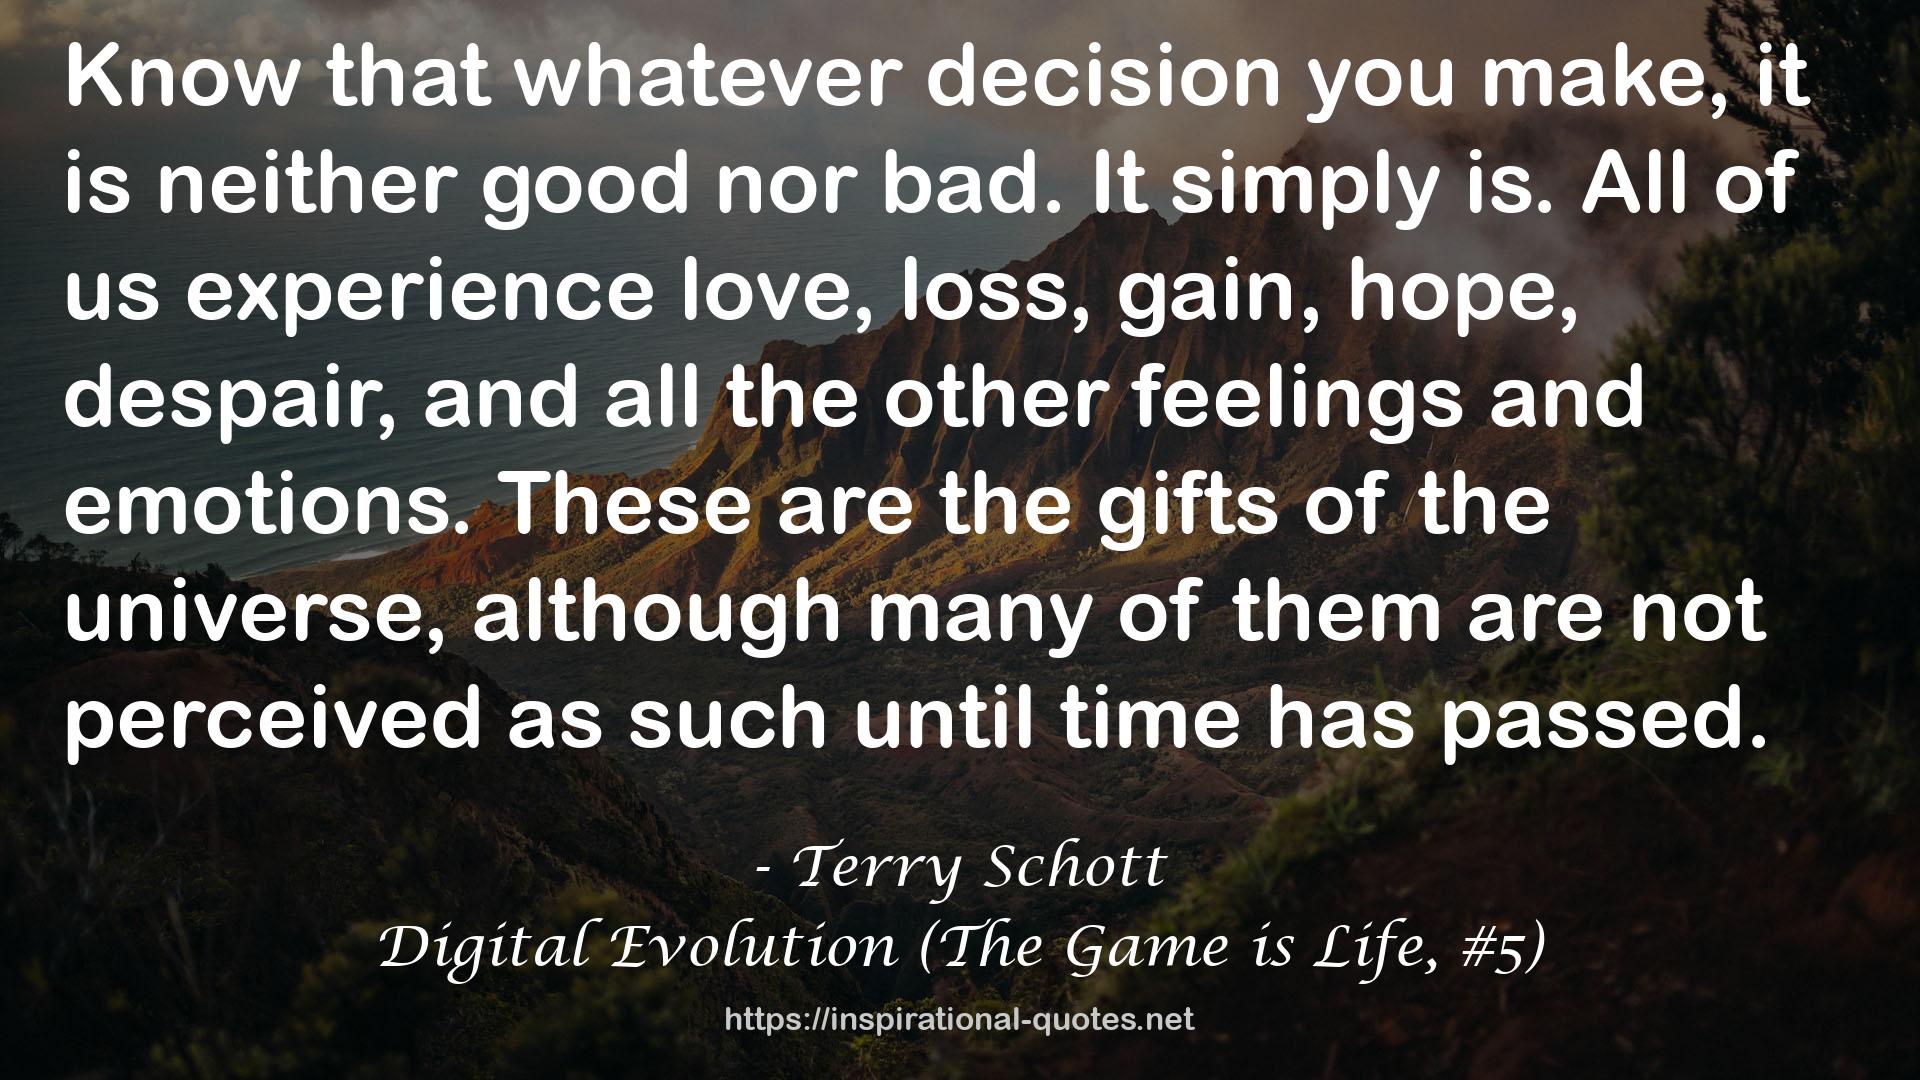 Digital Evolution (The Game is Life, #5) QUOTES